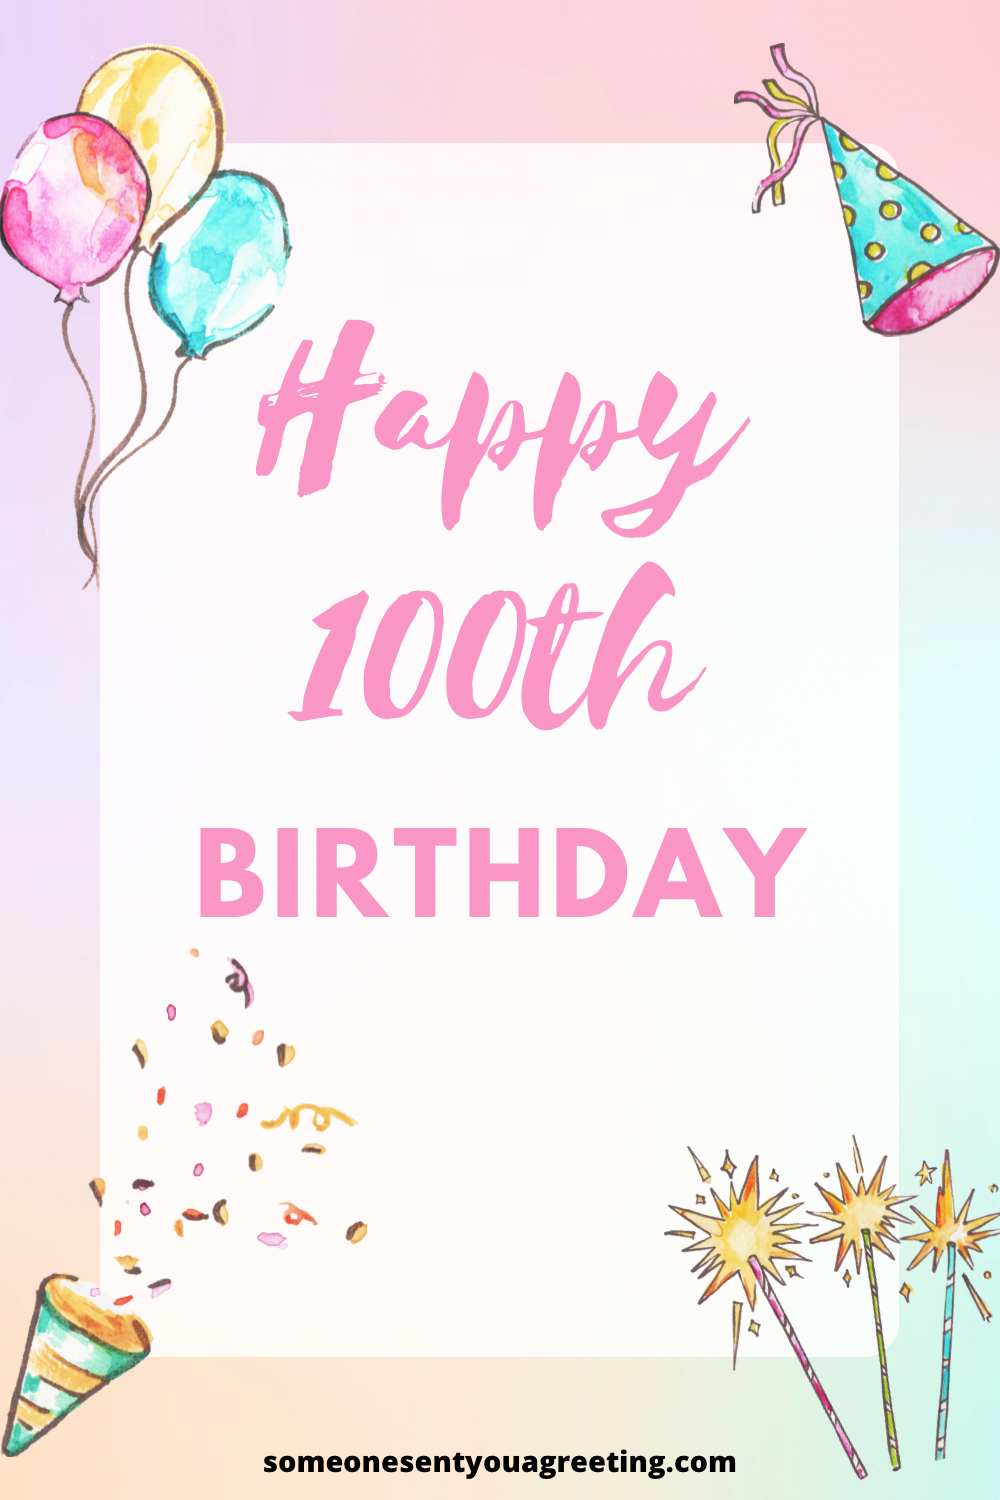 100th birthday message for a loved one